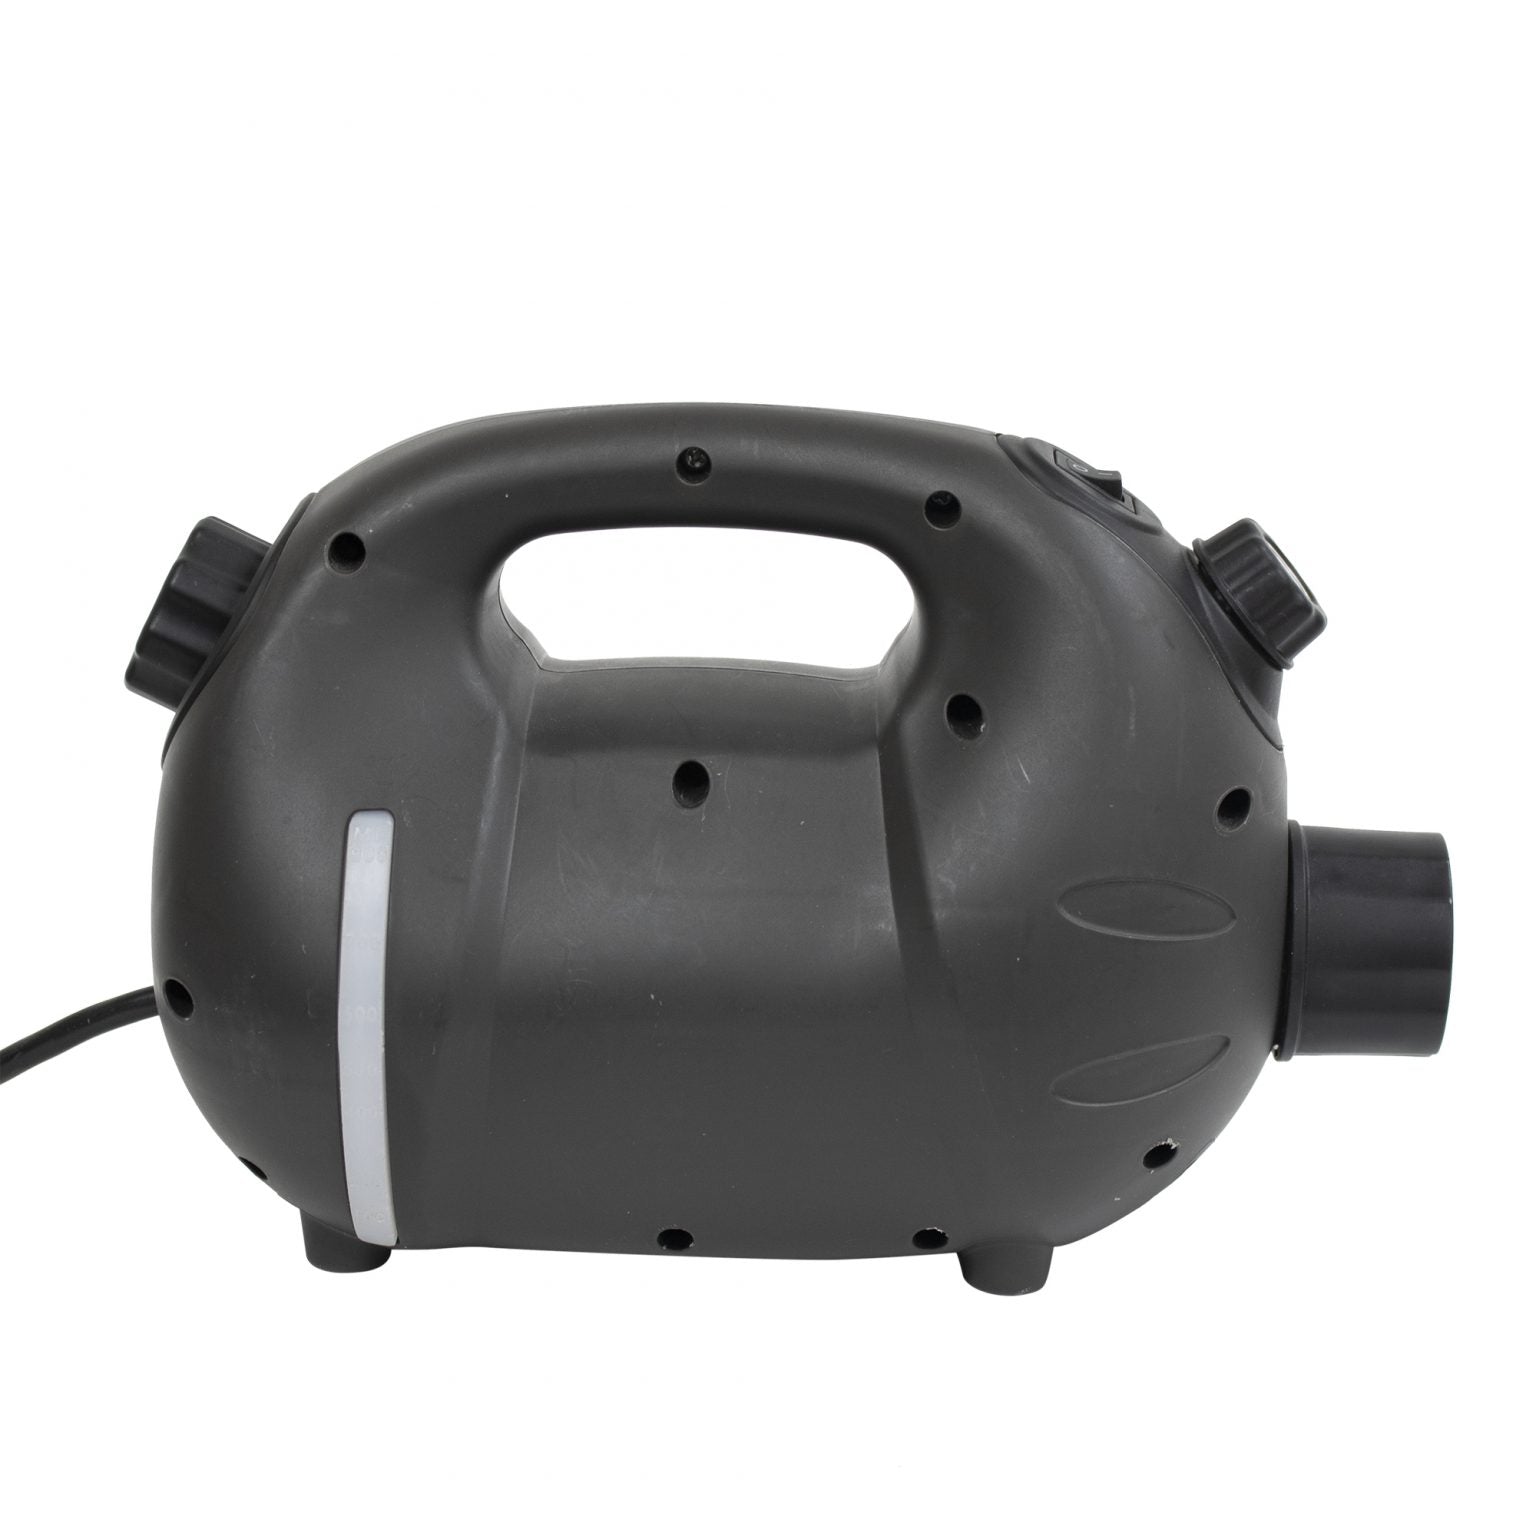 XPOWER F-8 ULV Cold Fogger w/ 20-Ft Power Cord - 800 ml Capacity - 200 ml/min Flow Rate